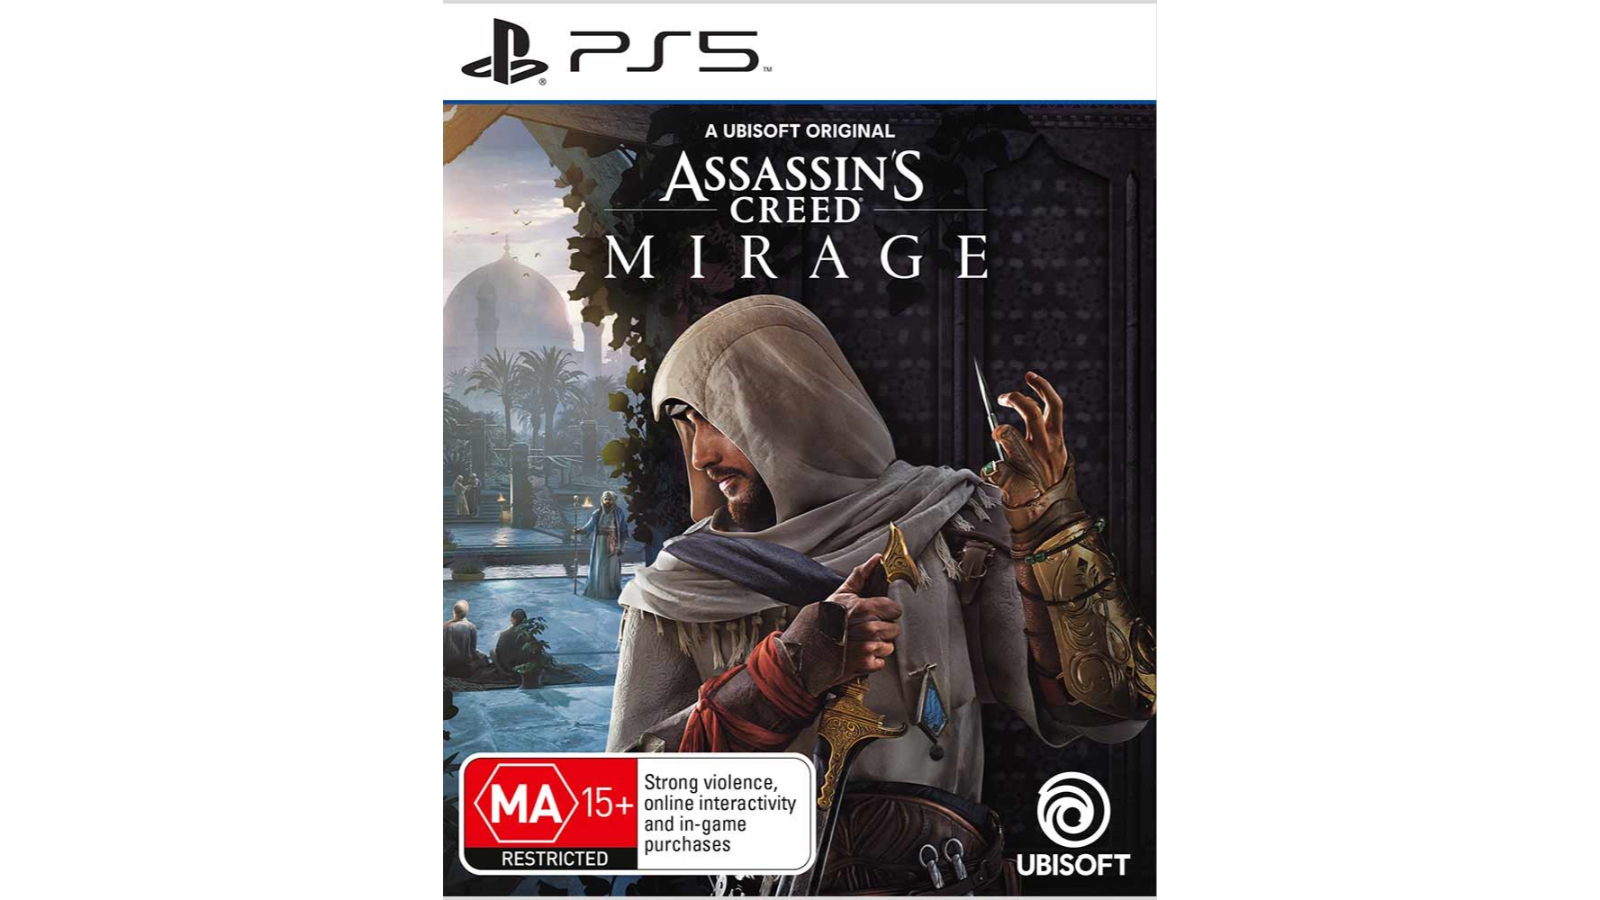 Assassins Creed Mirage (Playstation 5) - Own4Less